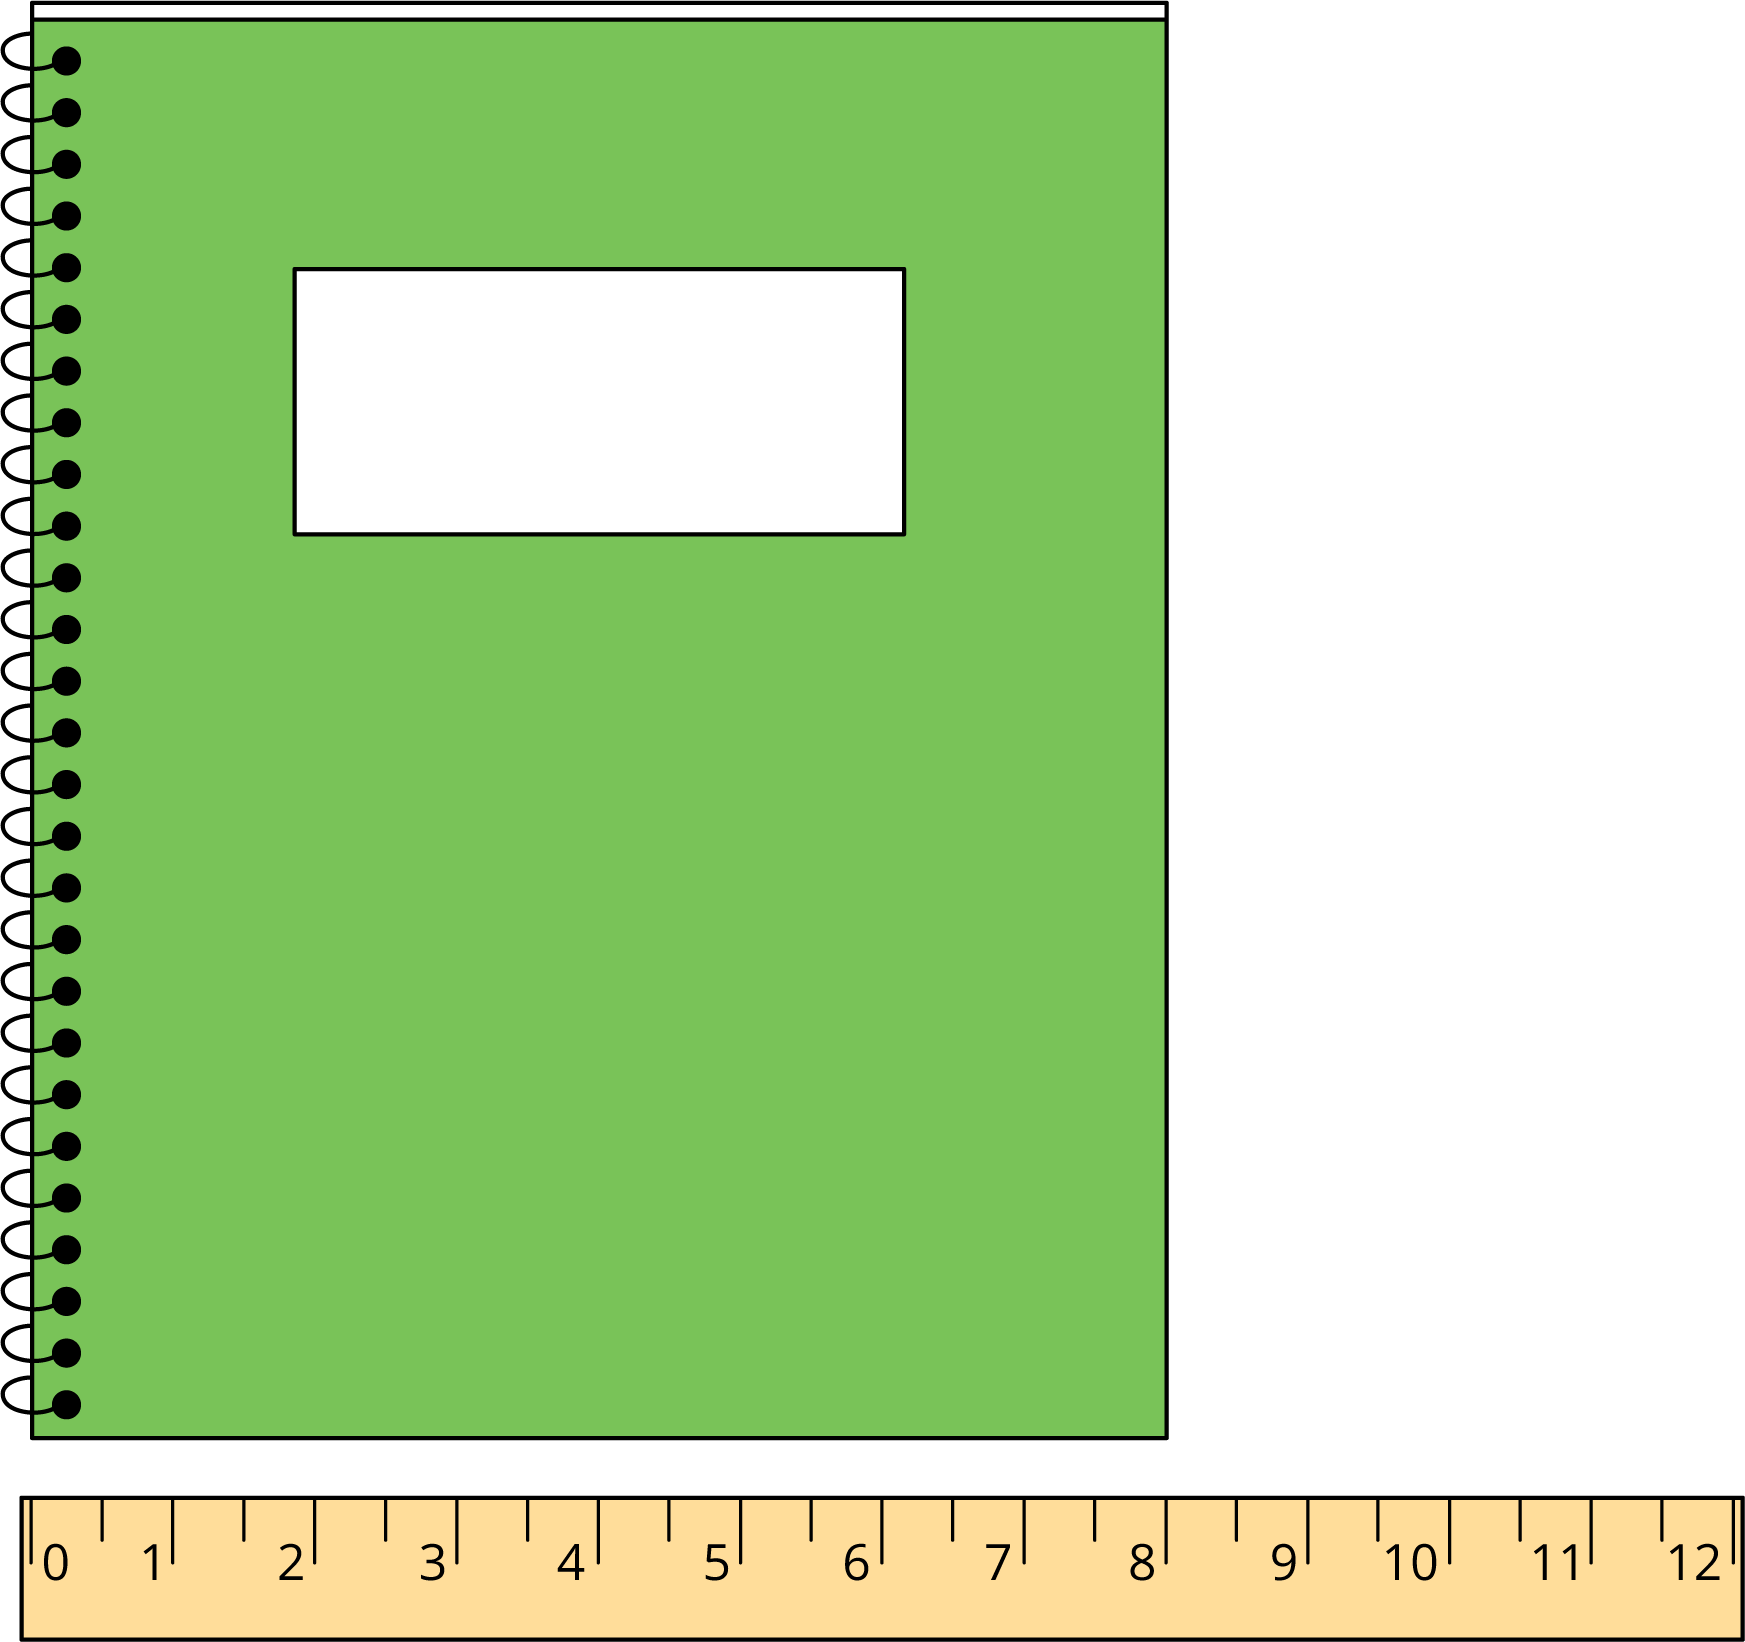 Ruler, from 0 to 12 by ones, measuring short side of a notebook. Notebook side starts at 0, ends at 8.